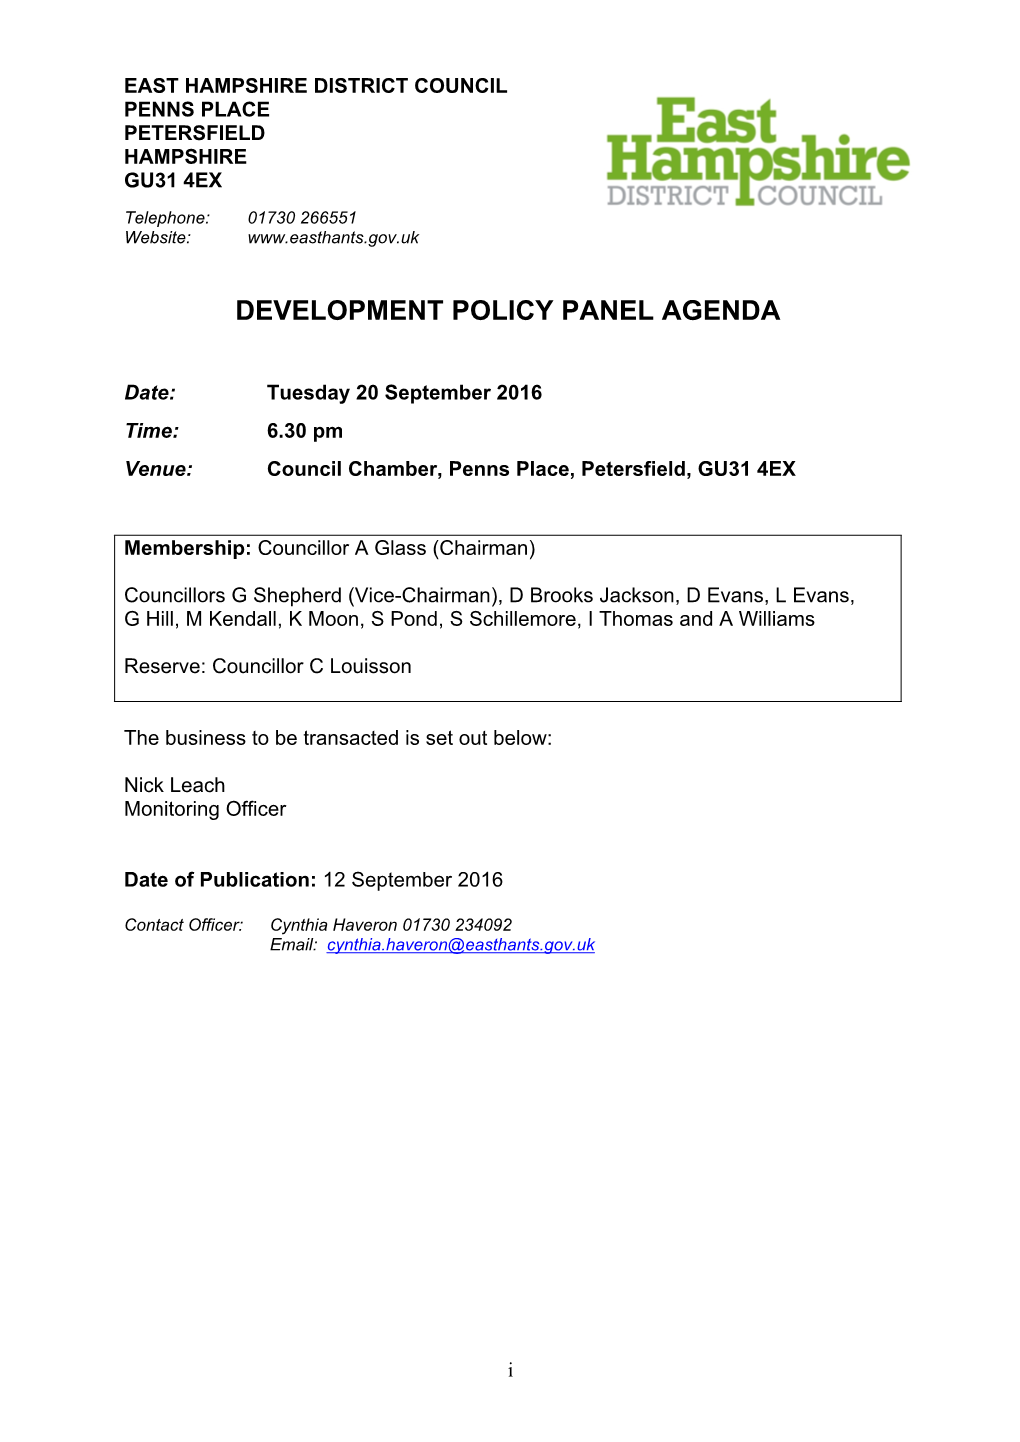 (Public Pack)Agenda Document for Development Policy Panel, 20/09